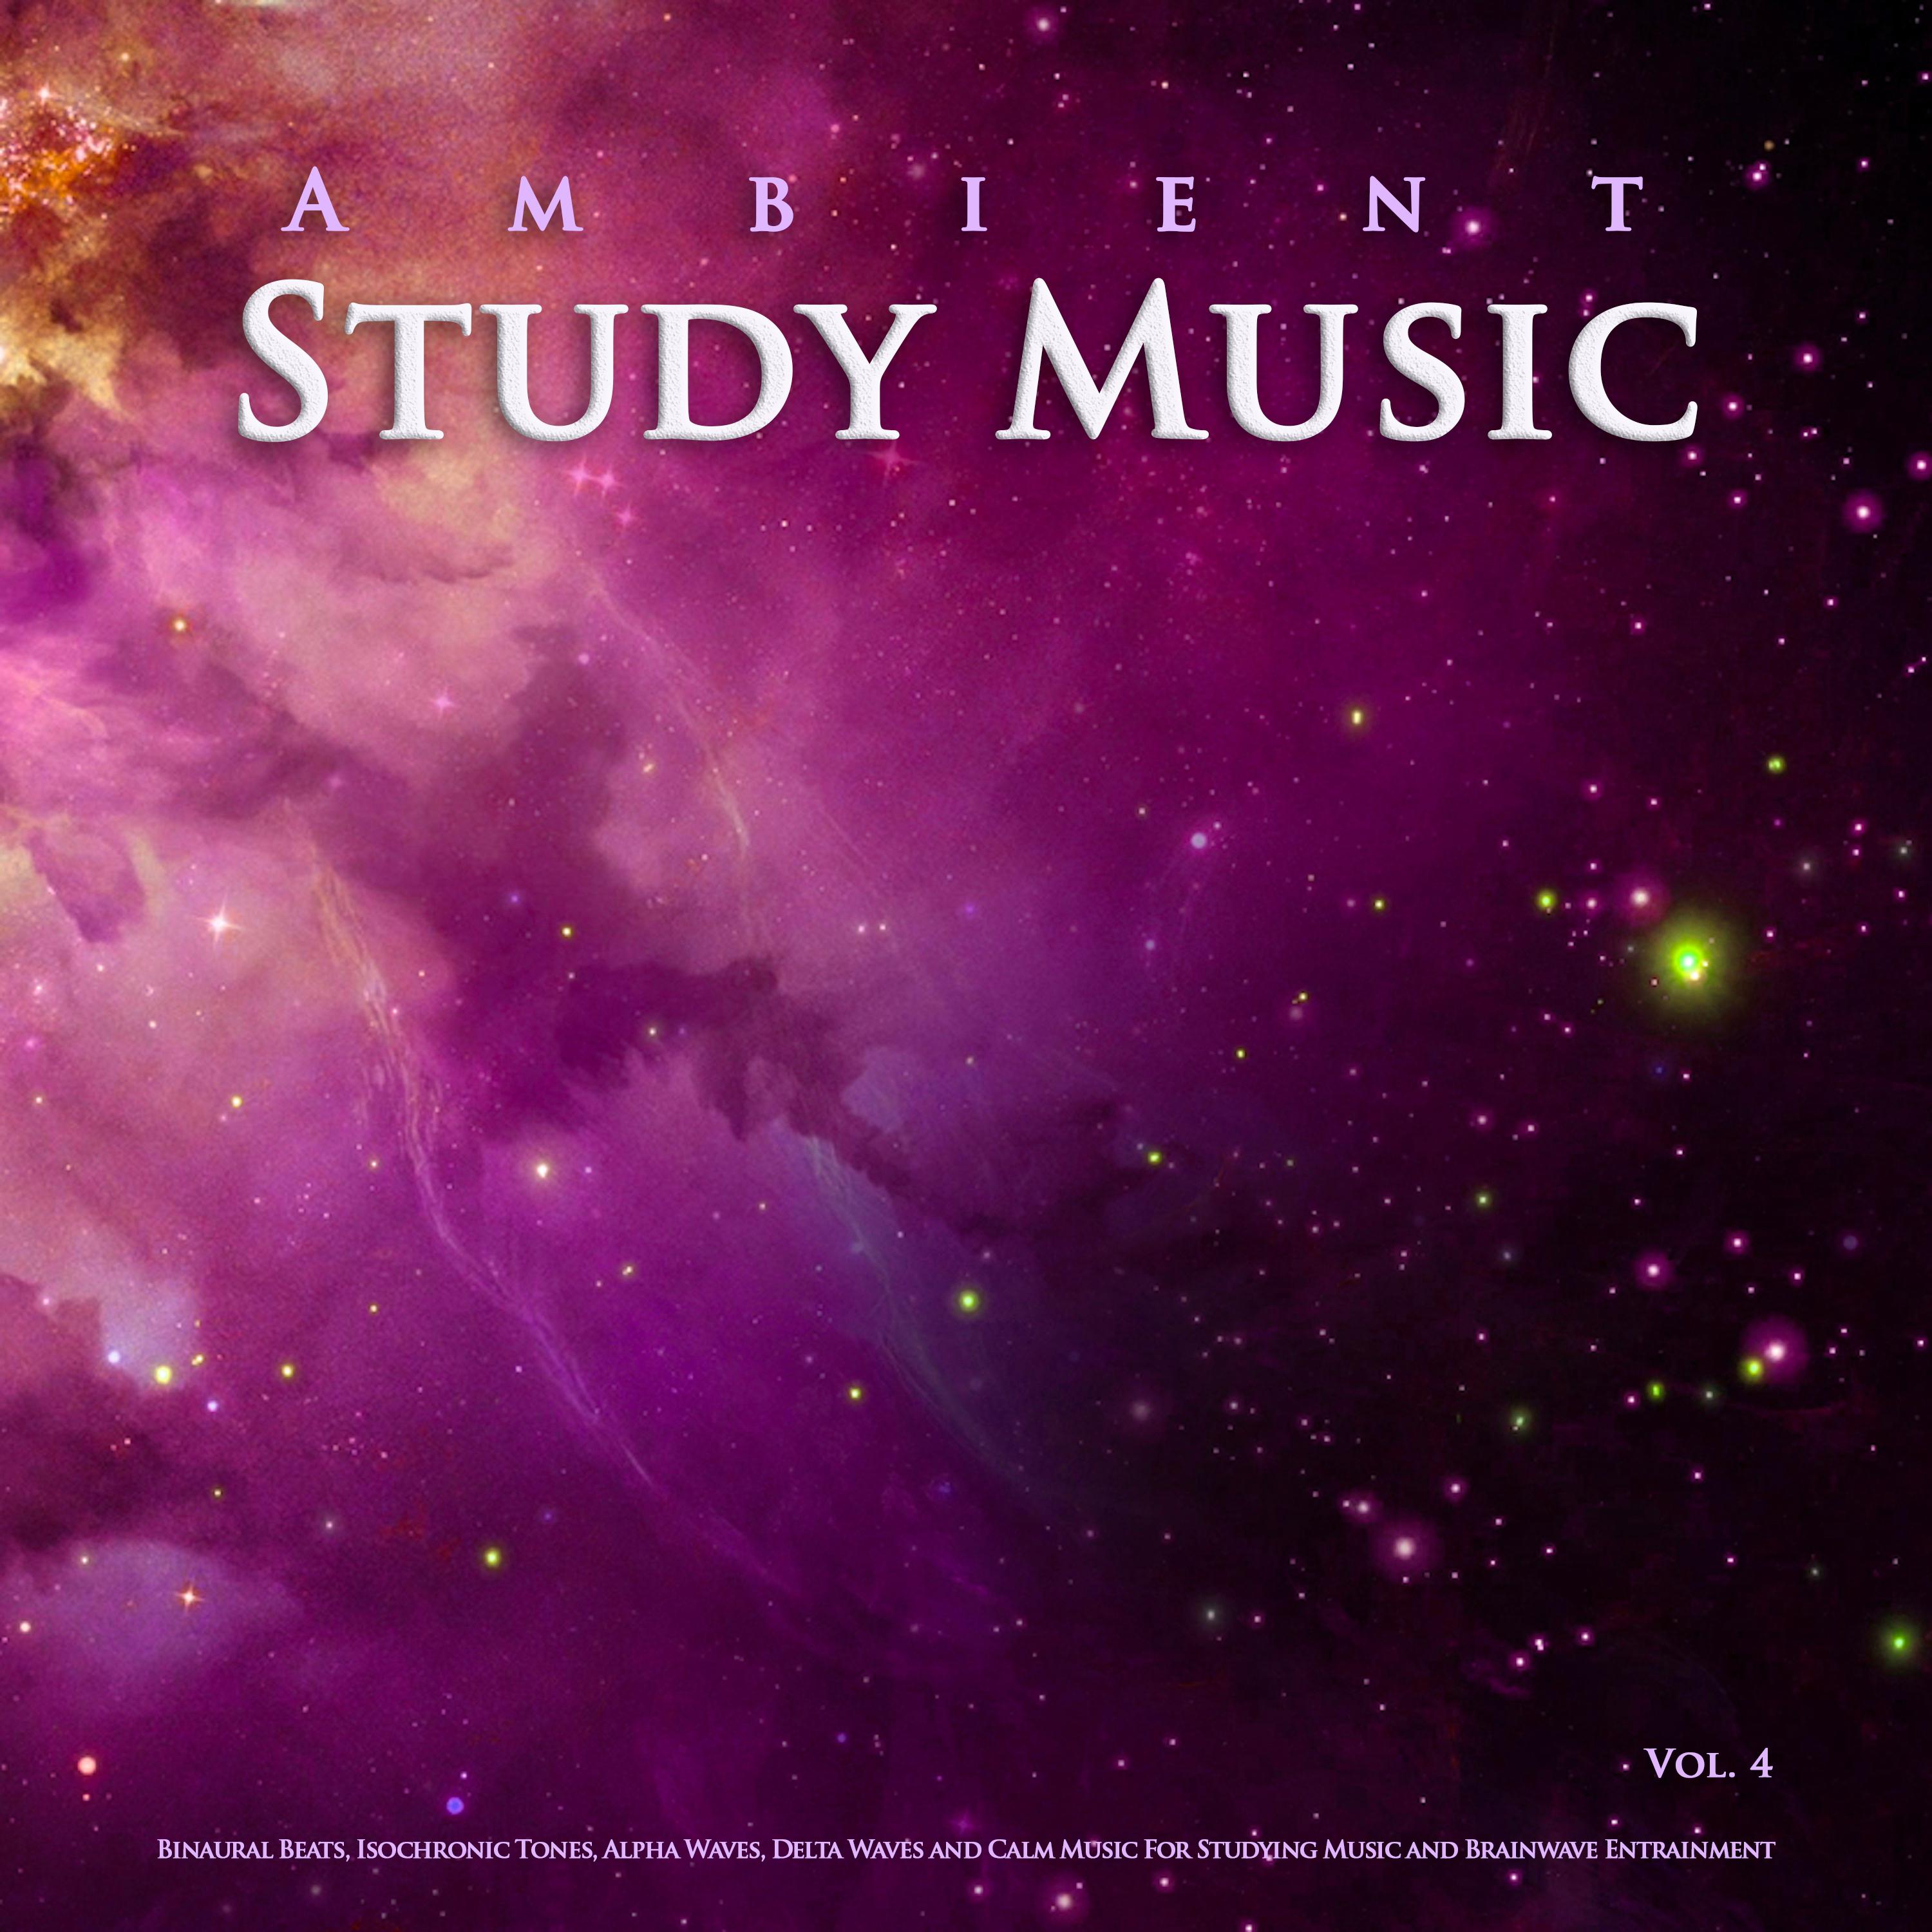 Ambient Study Music: Binaural Beats, Isochronic Tones, Alpha Waves, Delta Waves and Calm Music For Studying Music and Brainwave Entrainment, Vol. 4